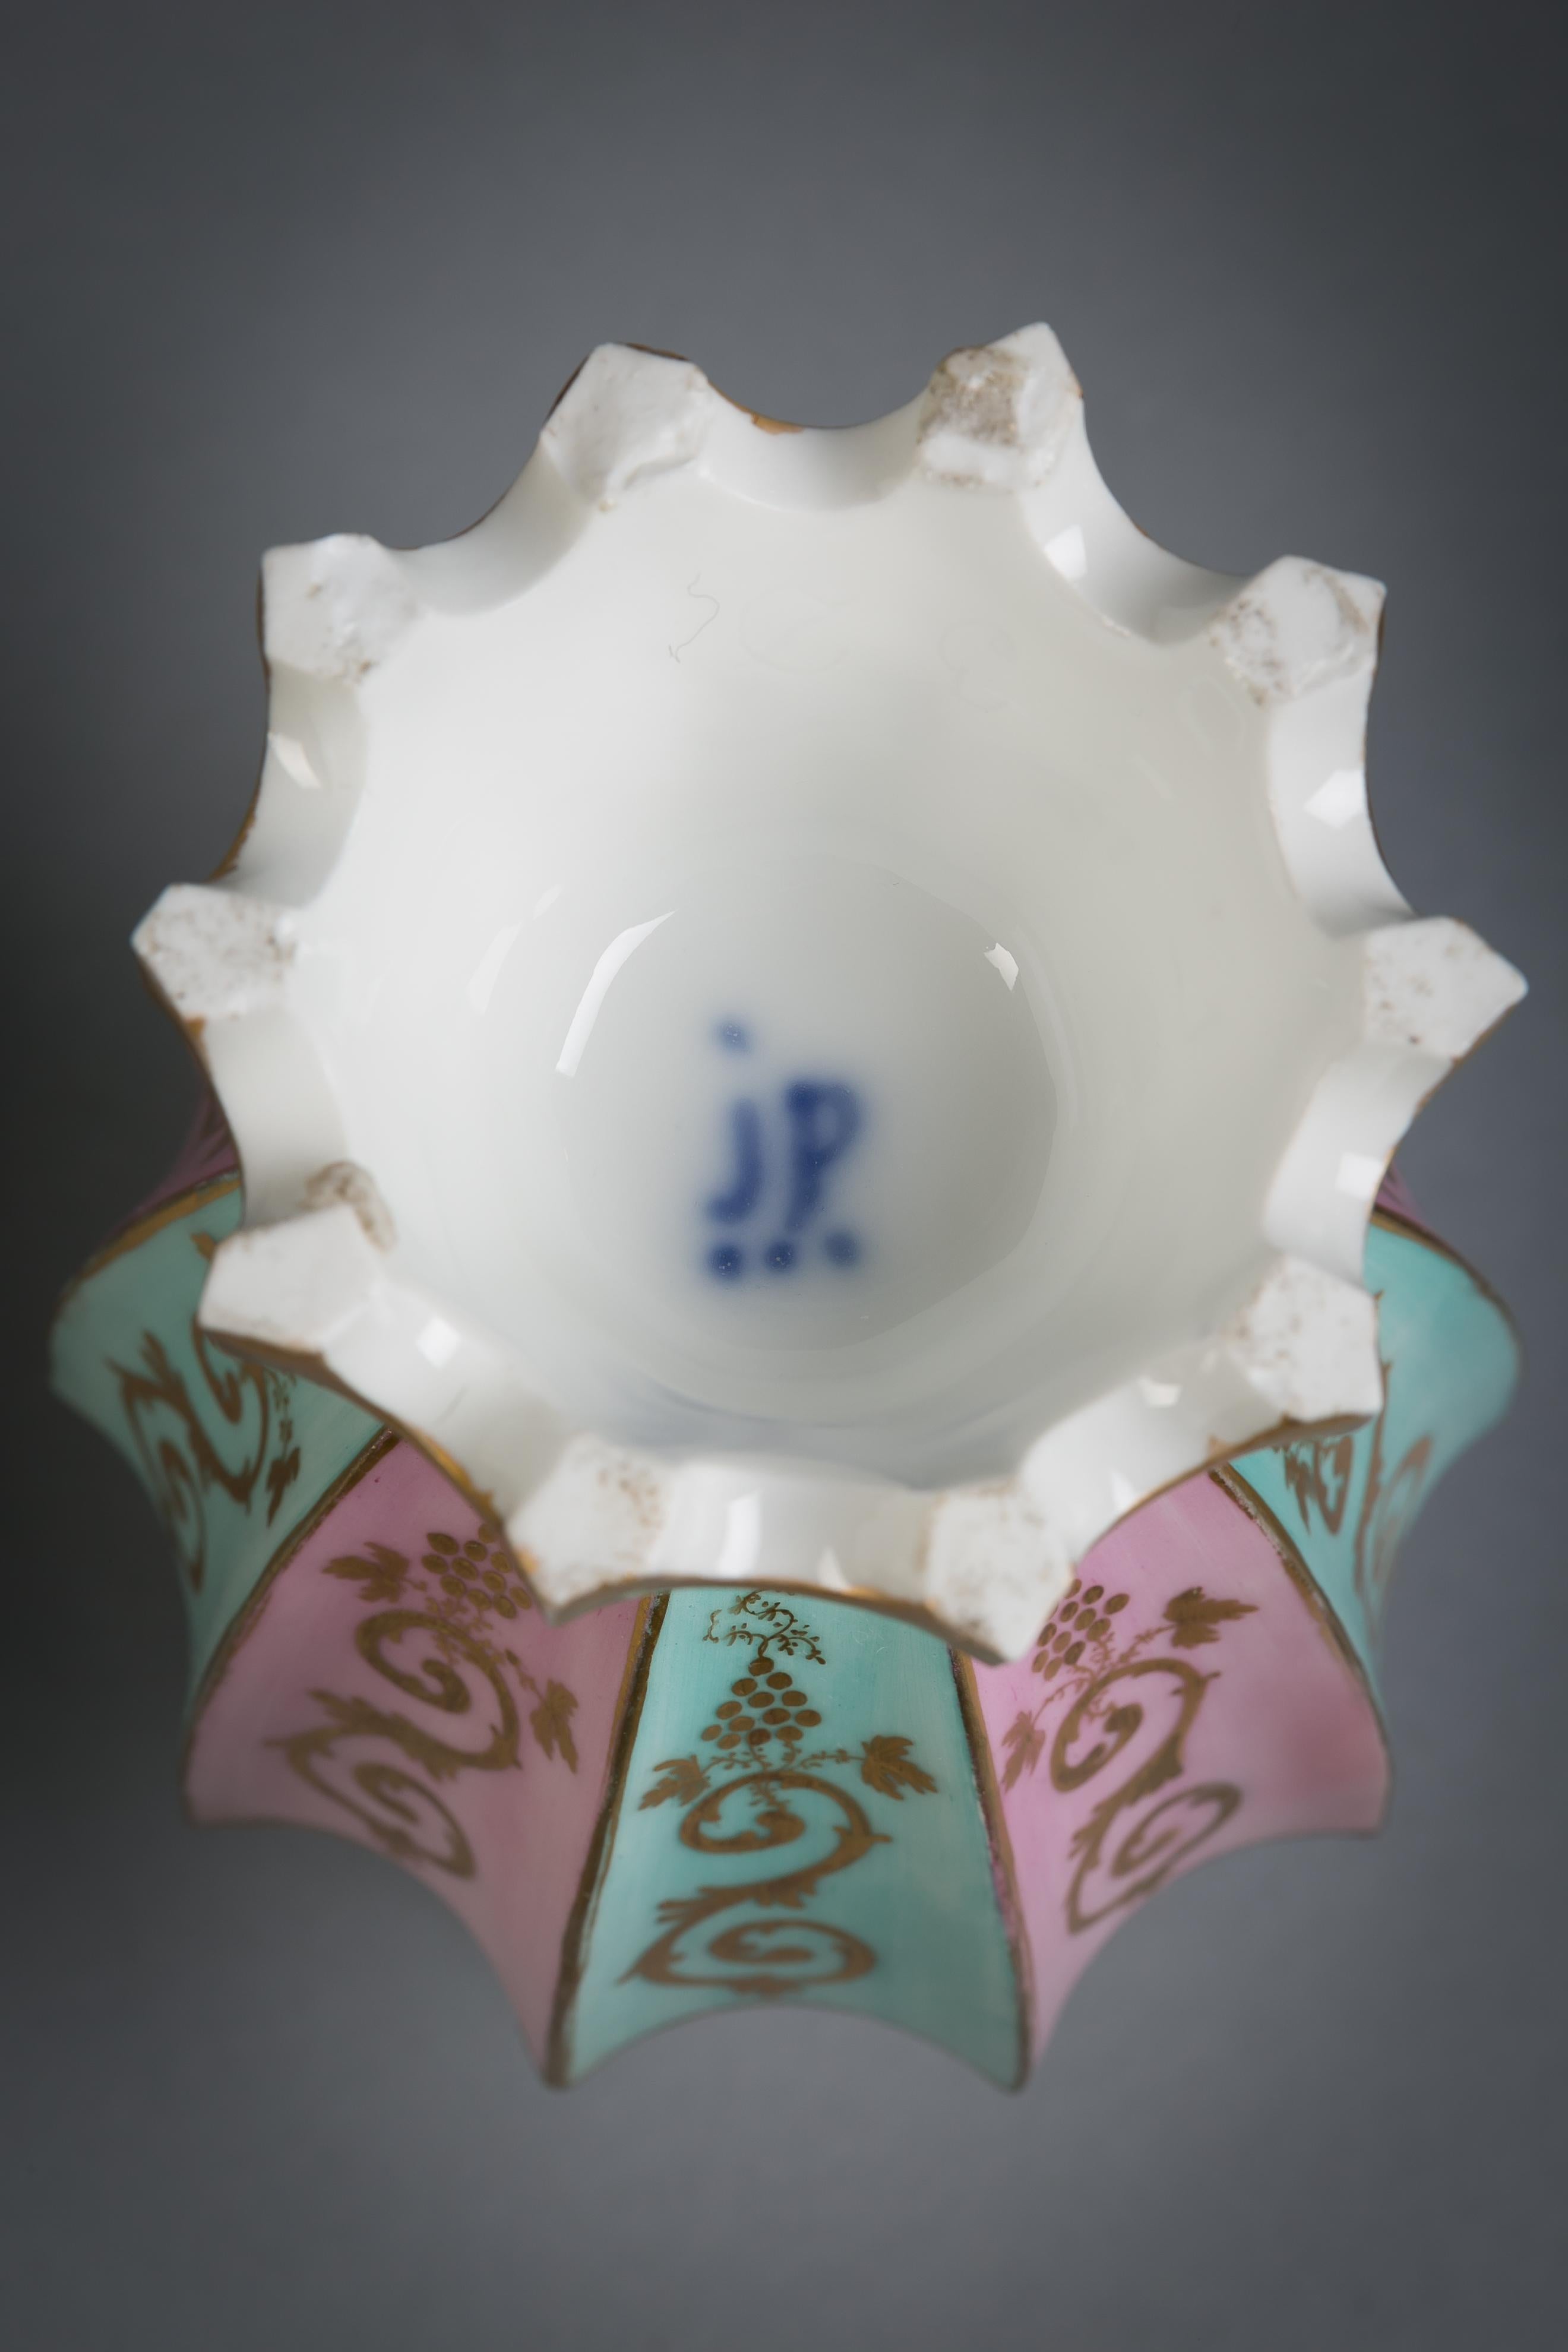 Mid-19th Century Pair of French Porcelain Perfume Bottles, Jacob Petit, circa 1850 For Sale